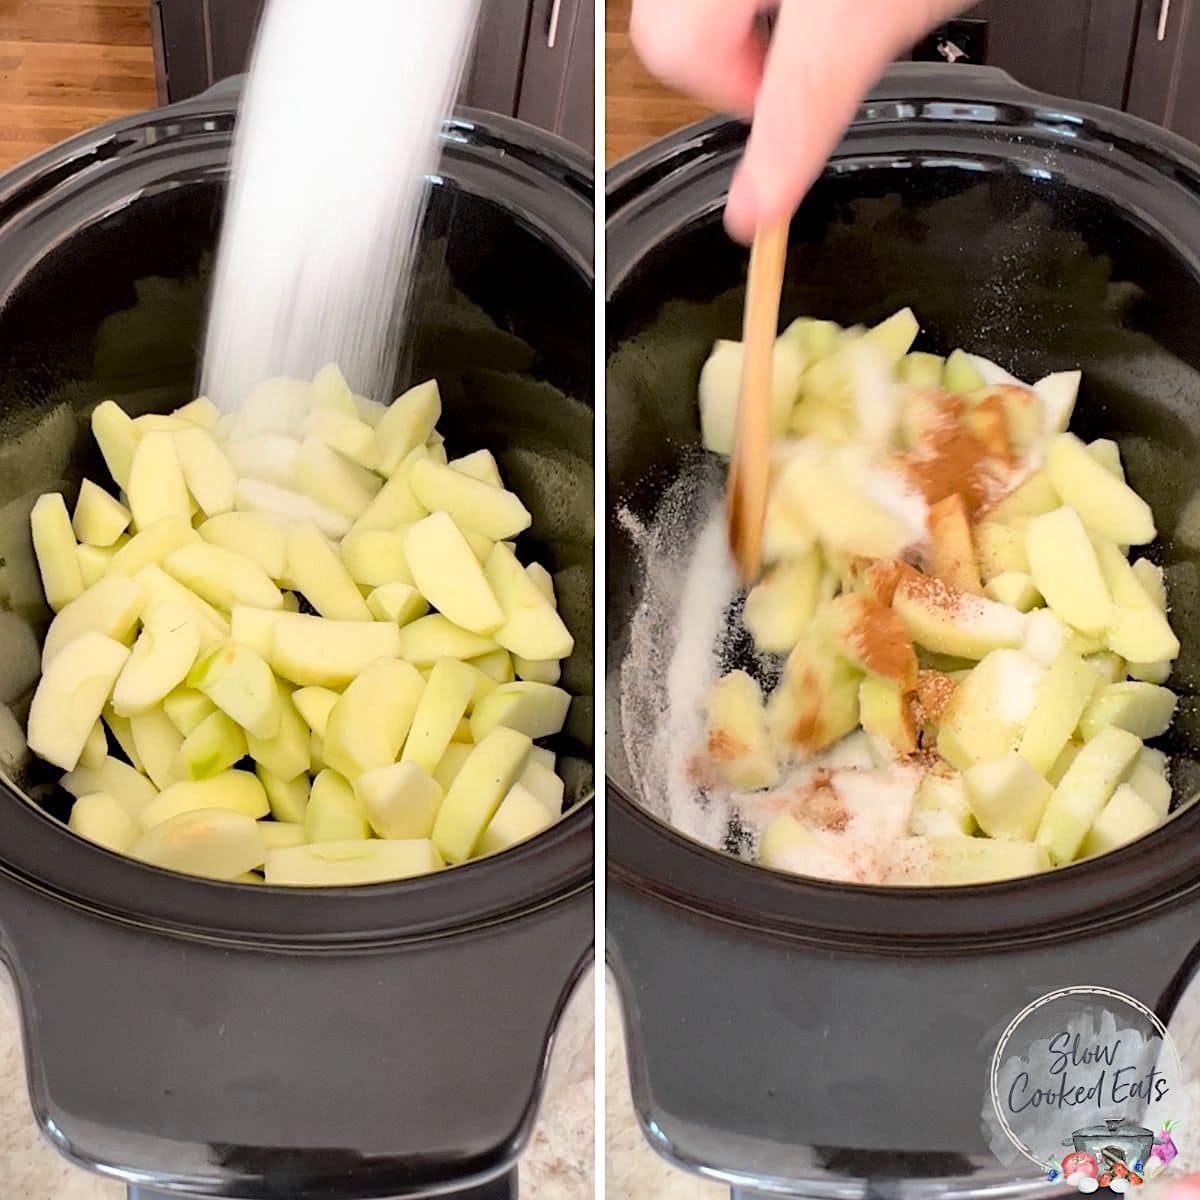 Stirring sugar and spices into the apple crisp in a black oval crockpot.